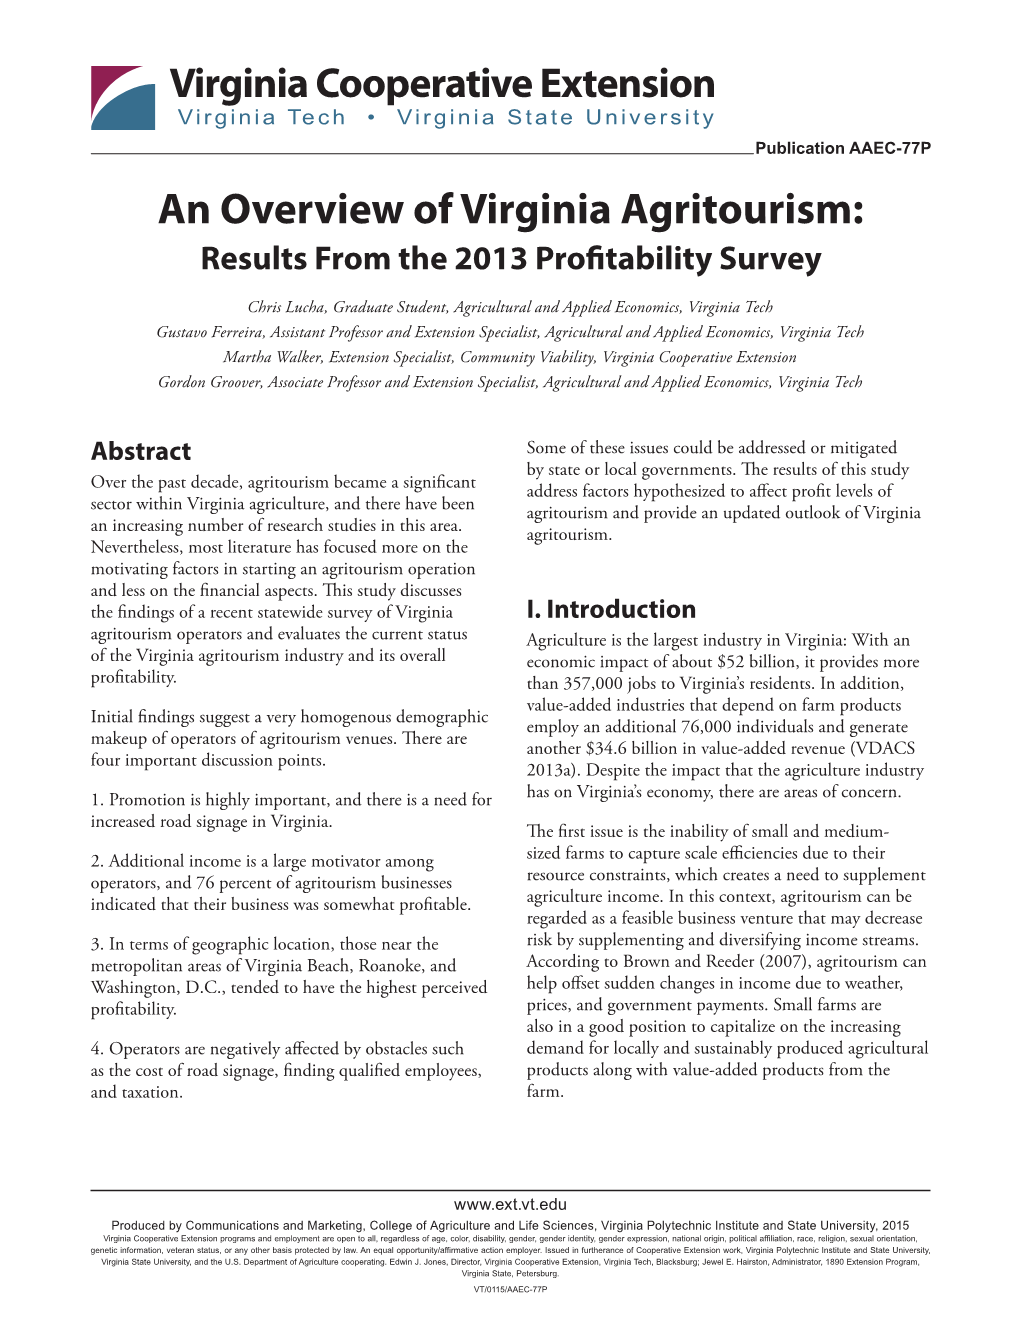 An Overview of Virginia Agritourism: Results from the 2013 Profitability Survey